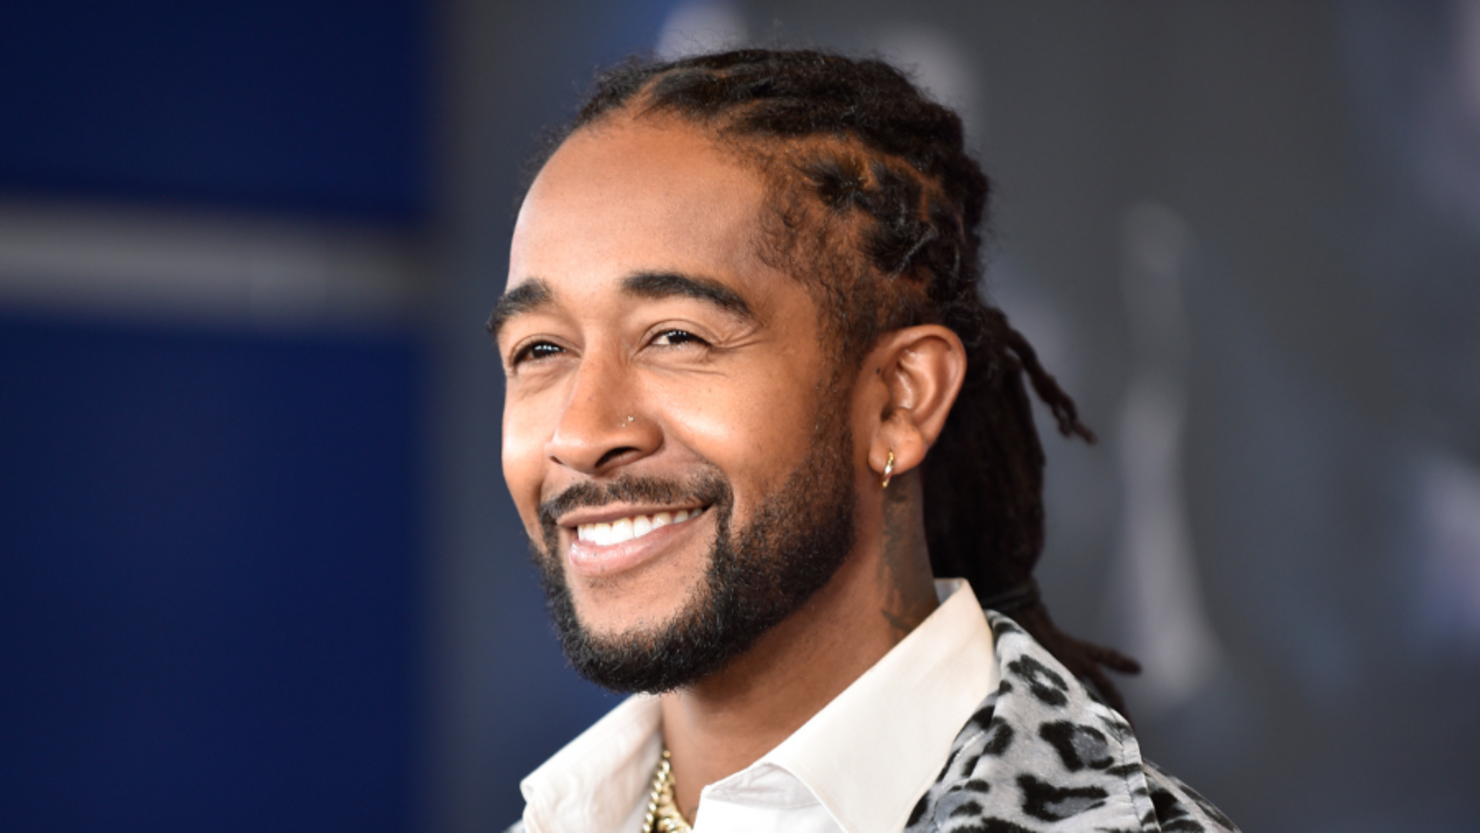 Omarion Says His Documentary Will Reveal The 'Truth' About B2K